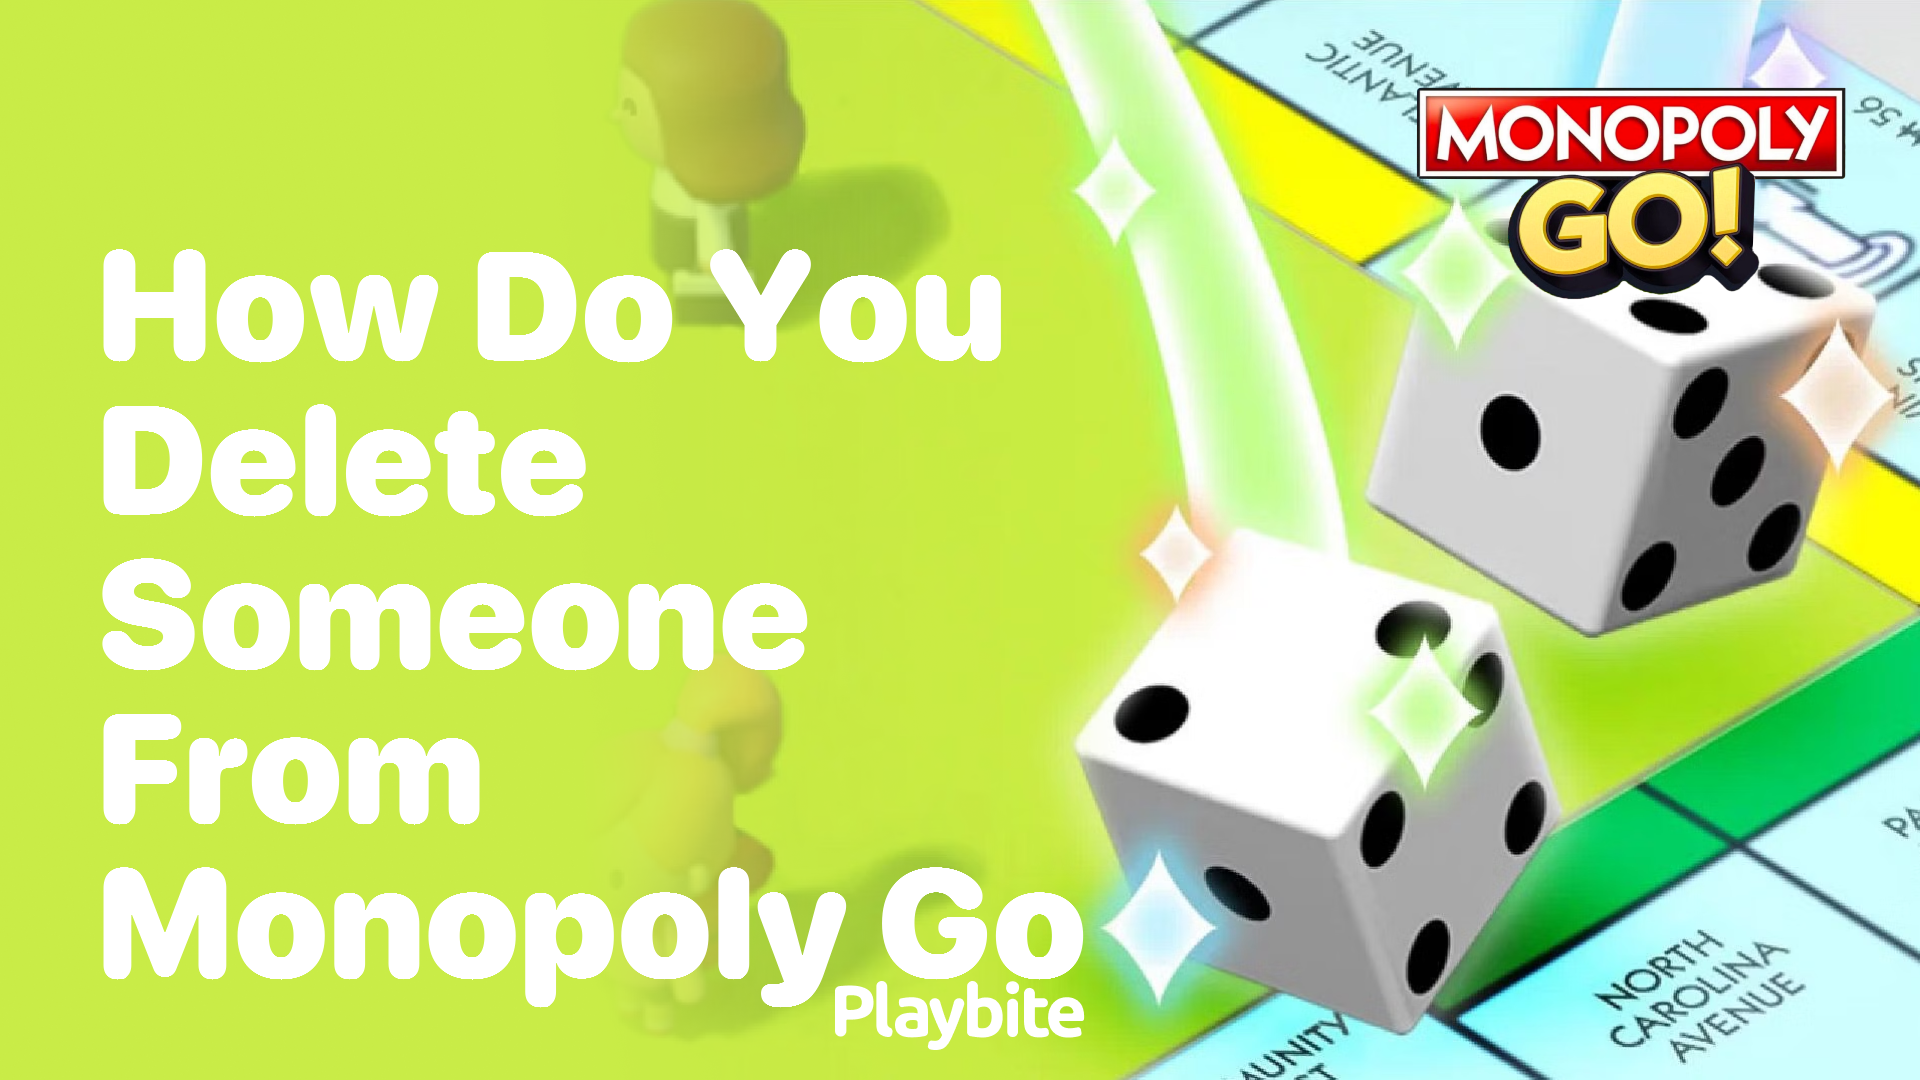 How Do You Delete Someone from Monopoly Go?